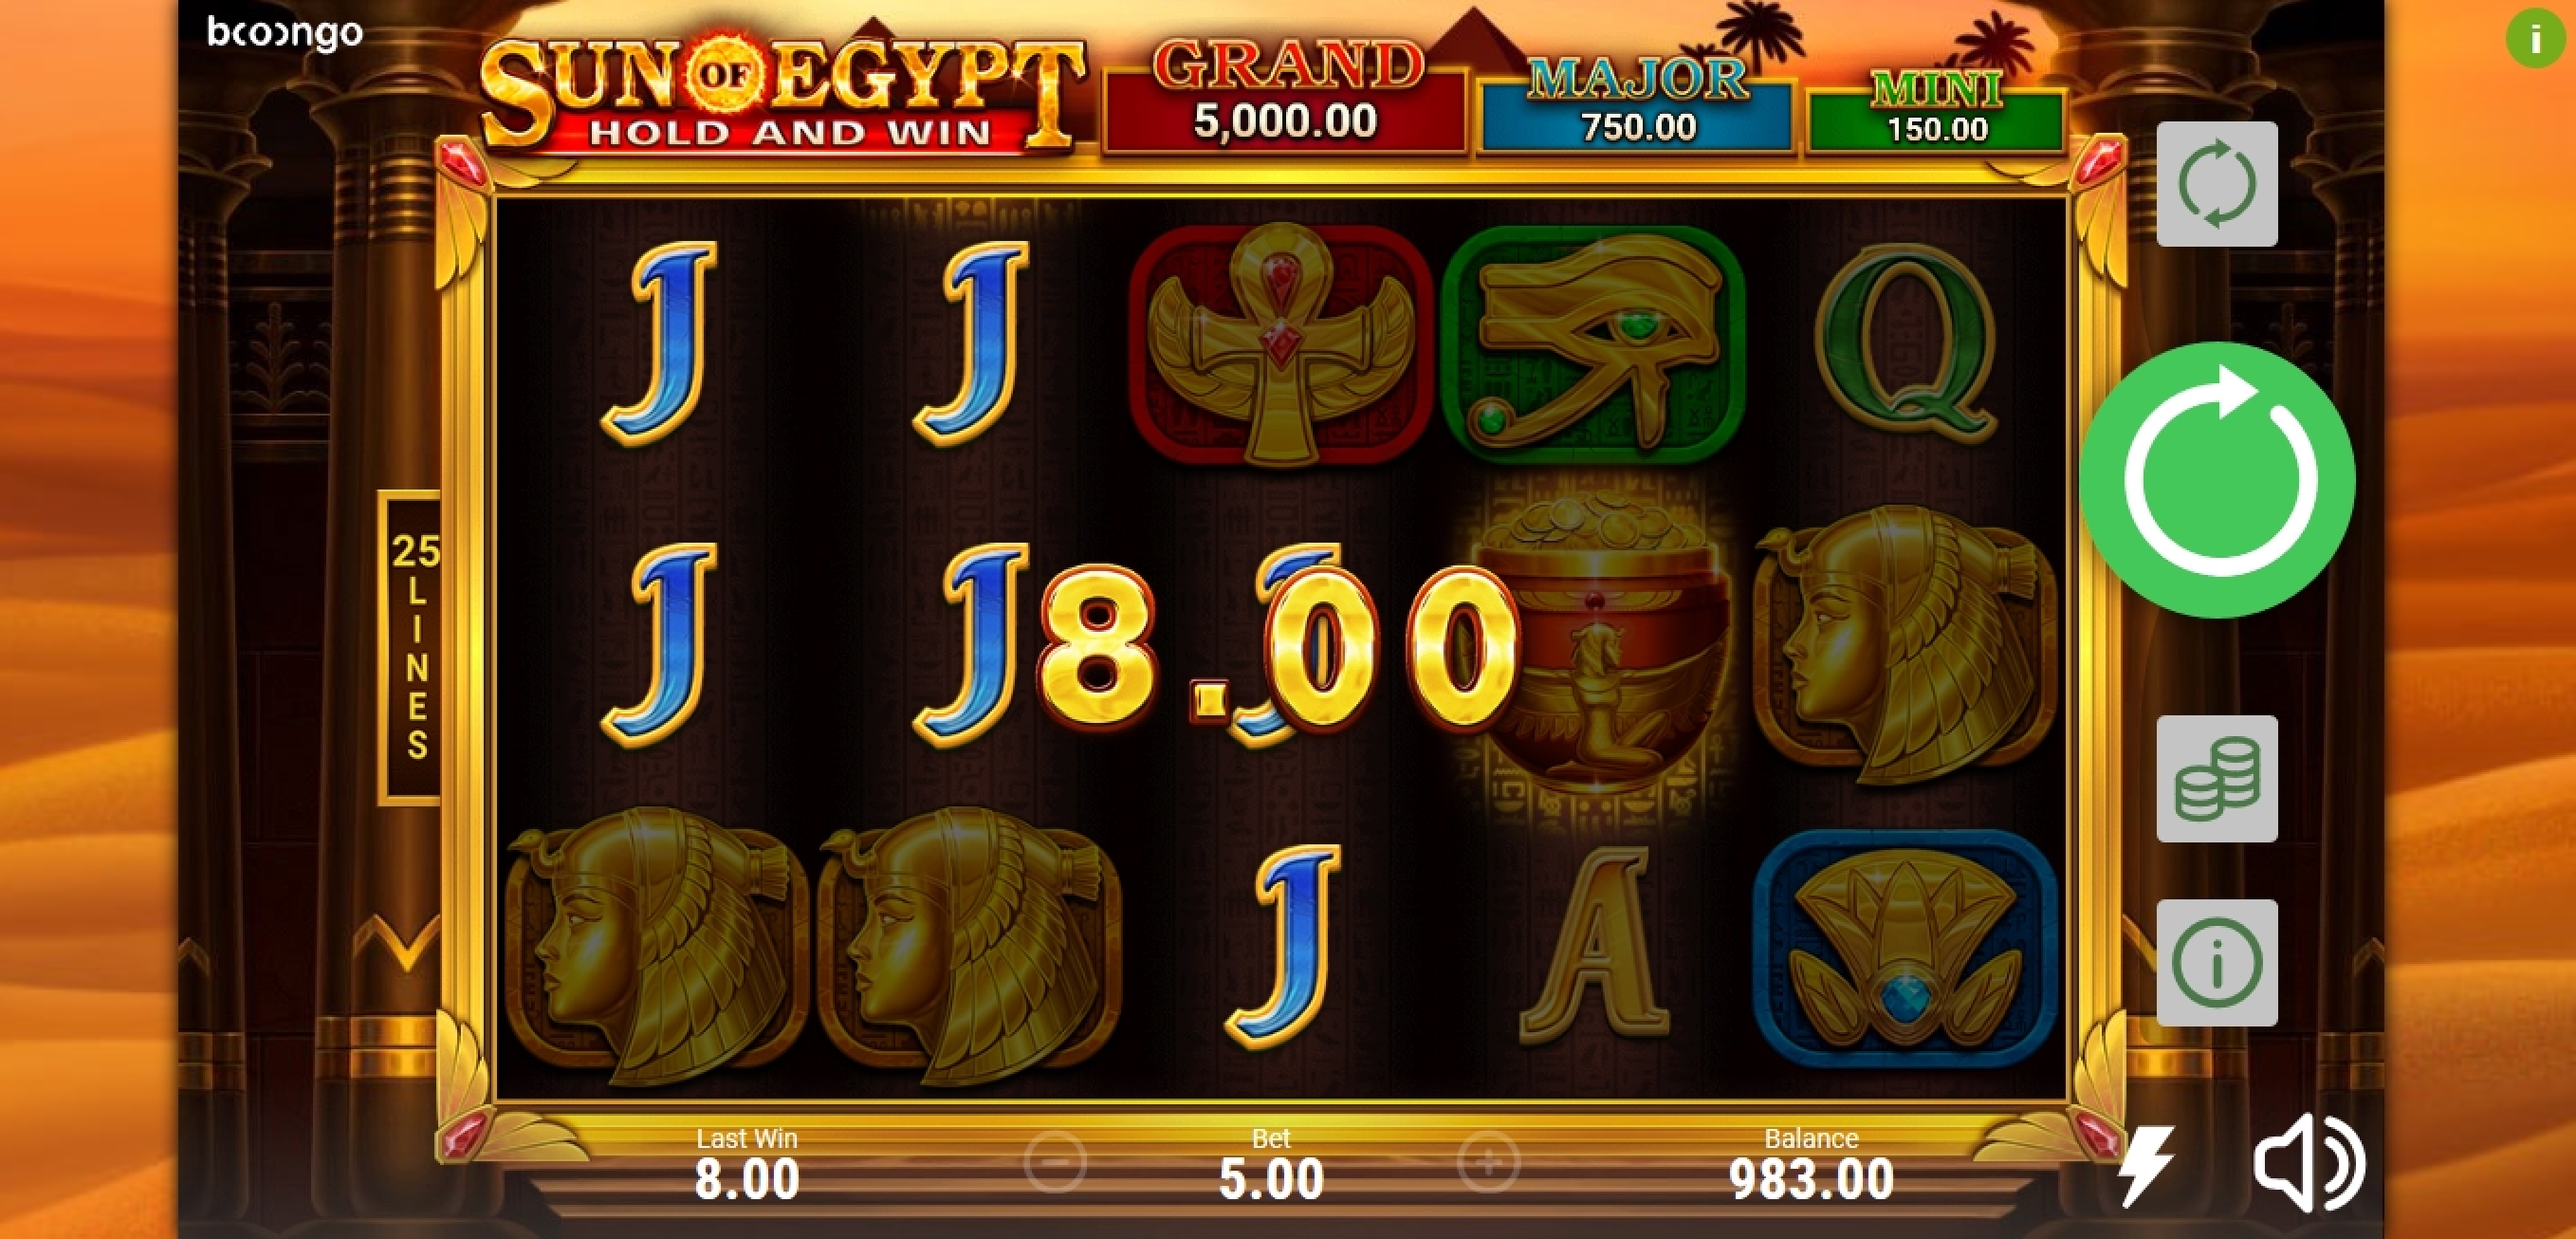 Win Money in Sun of Egypt Free Slot Game by Booongo Gaming